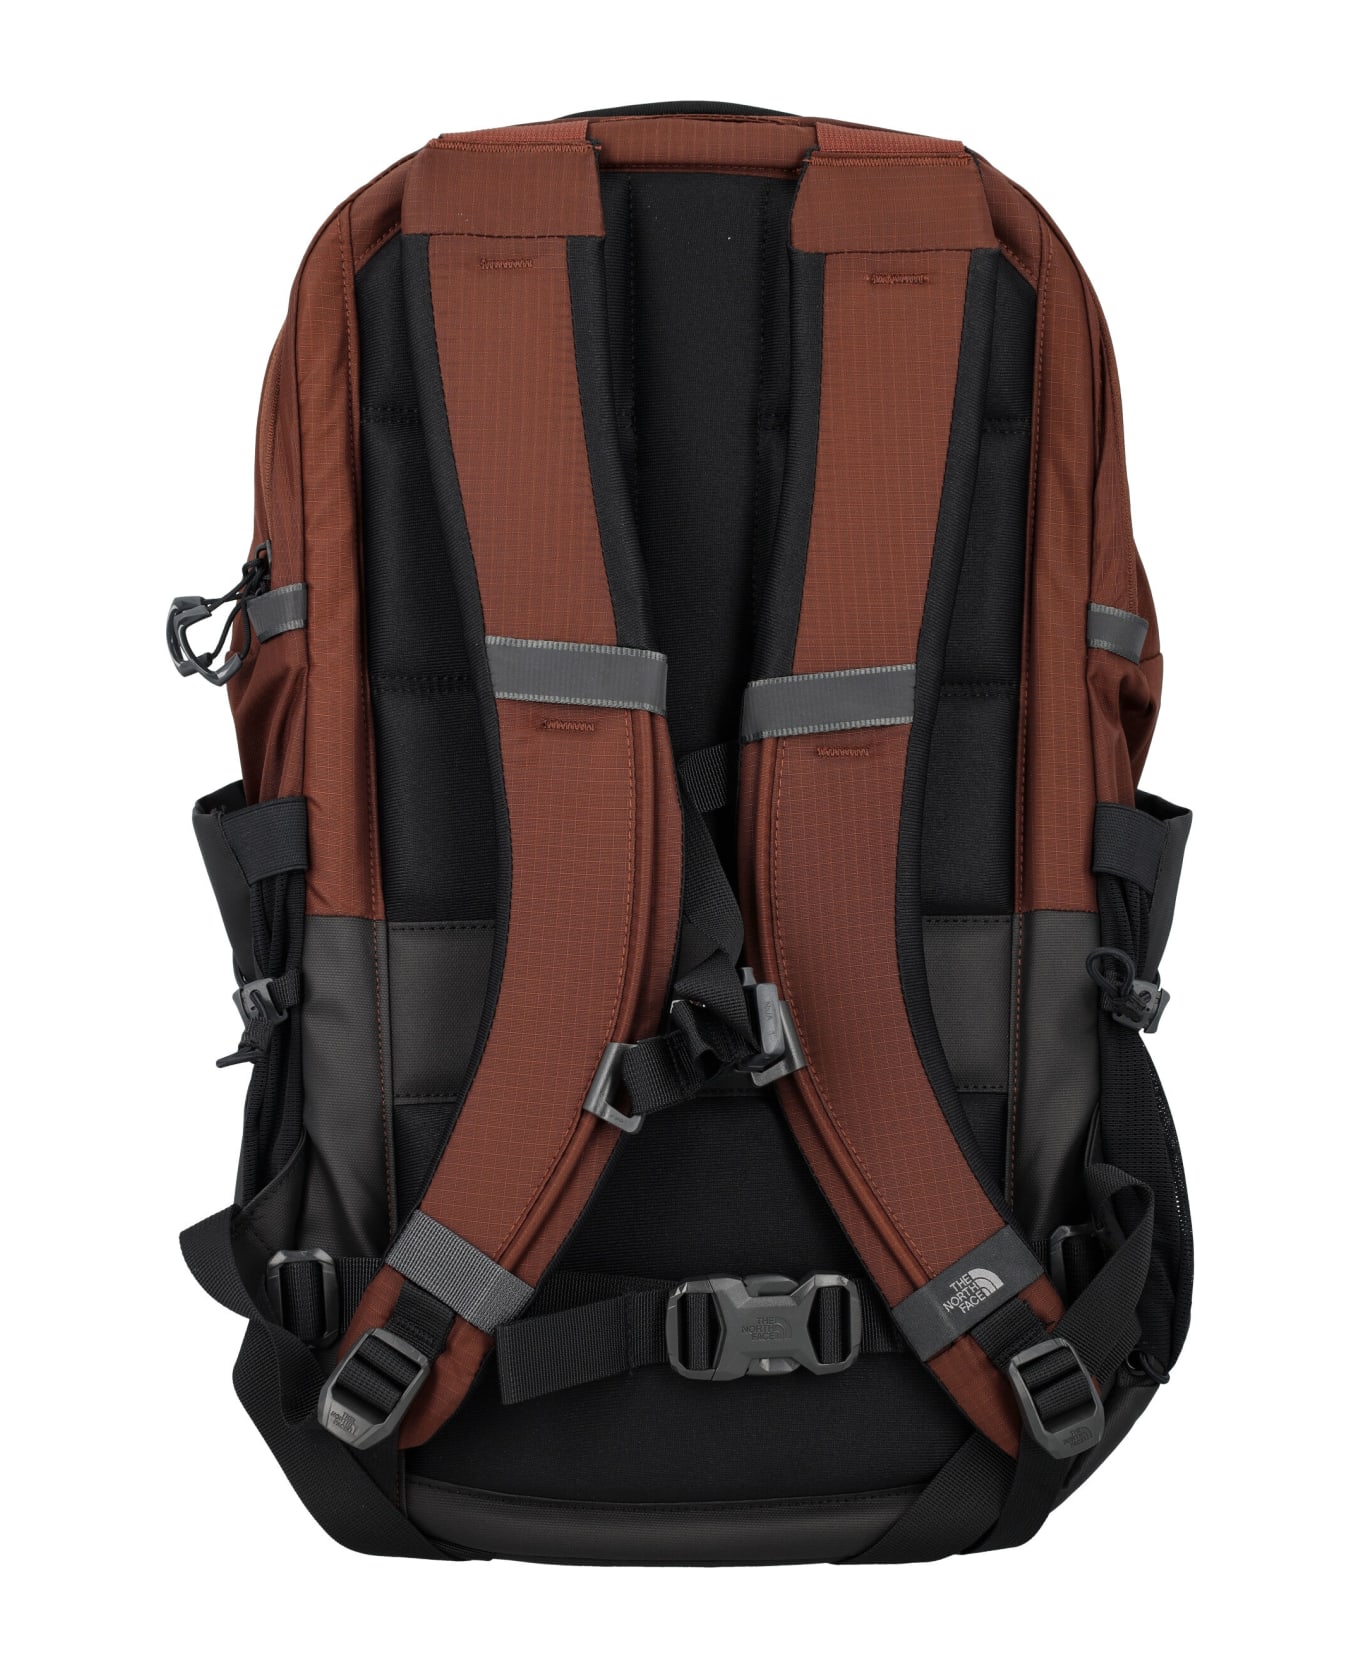 The North Face Borealis Backpack - BROWN